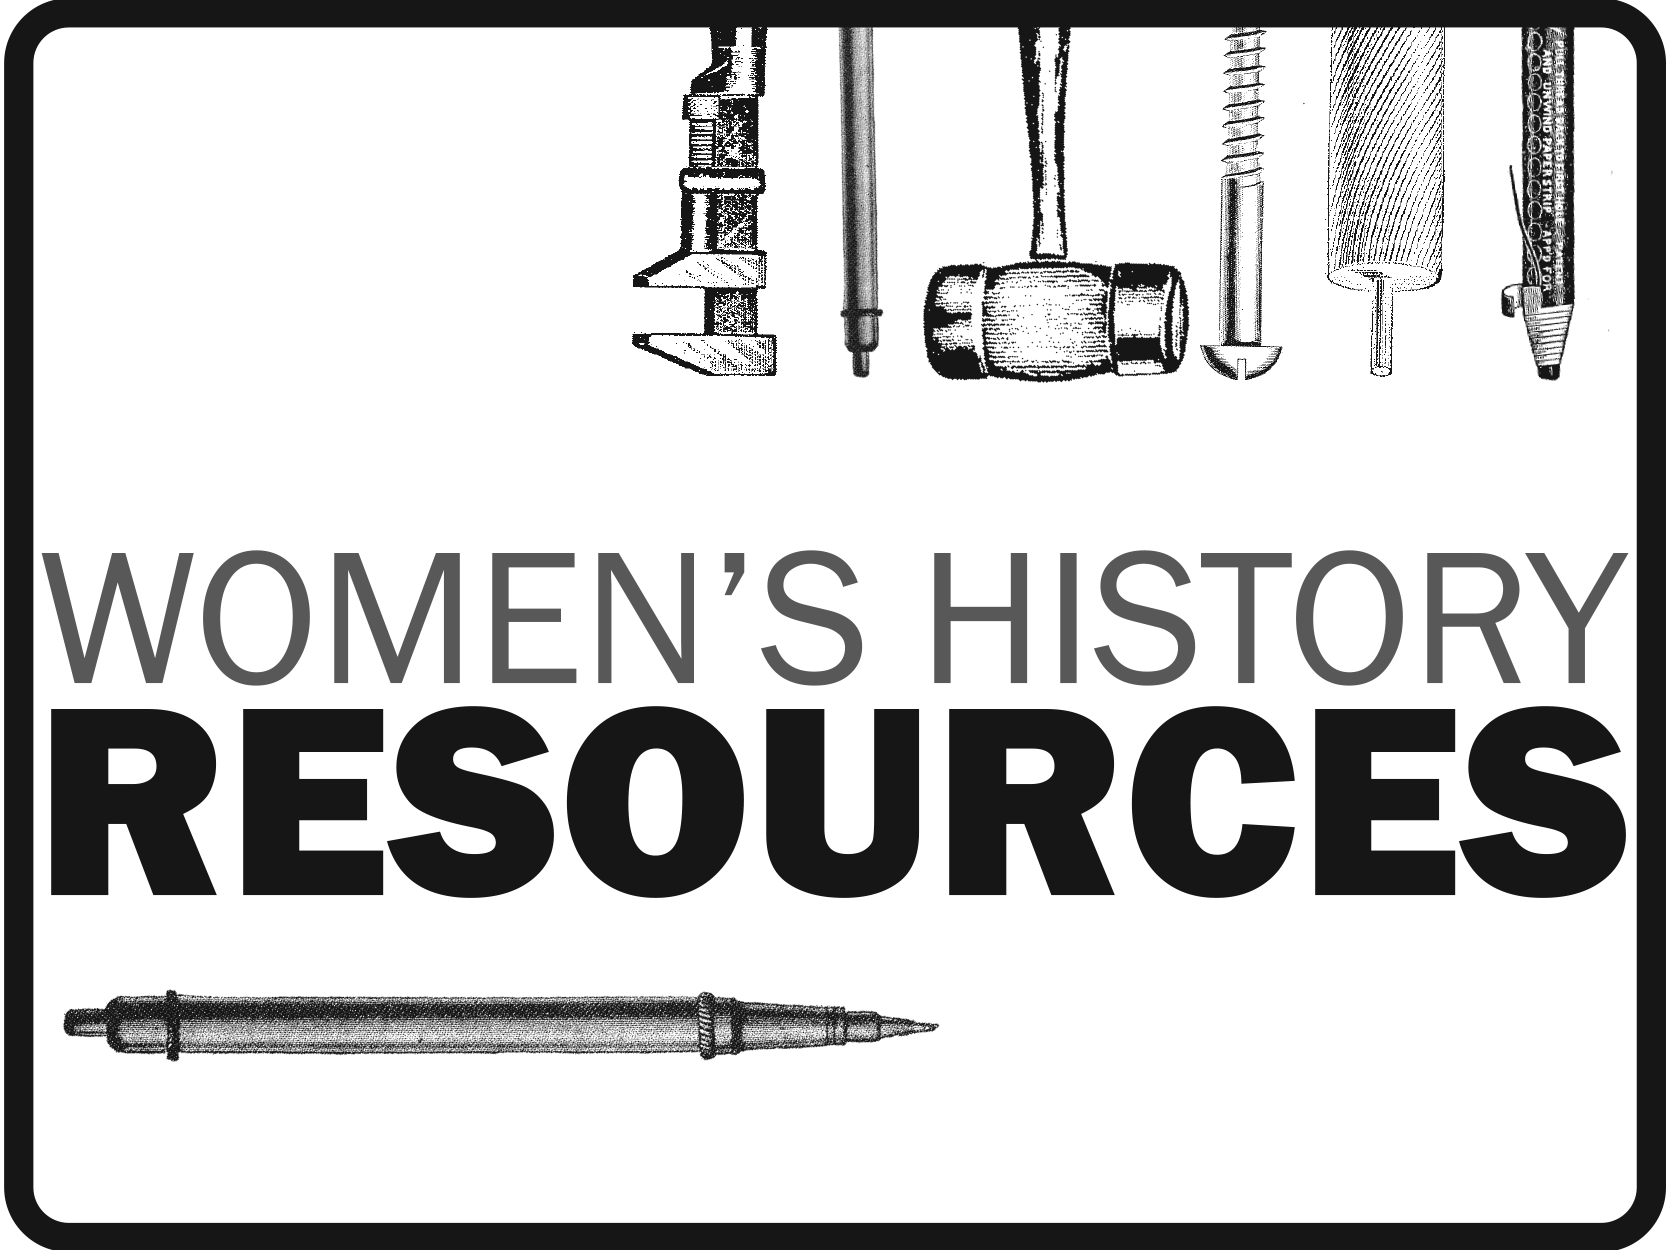 Womens History Resources